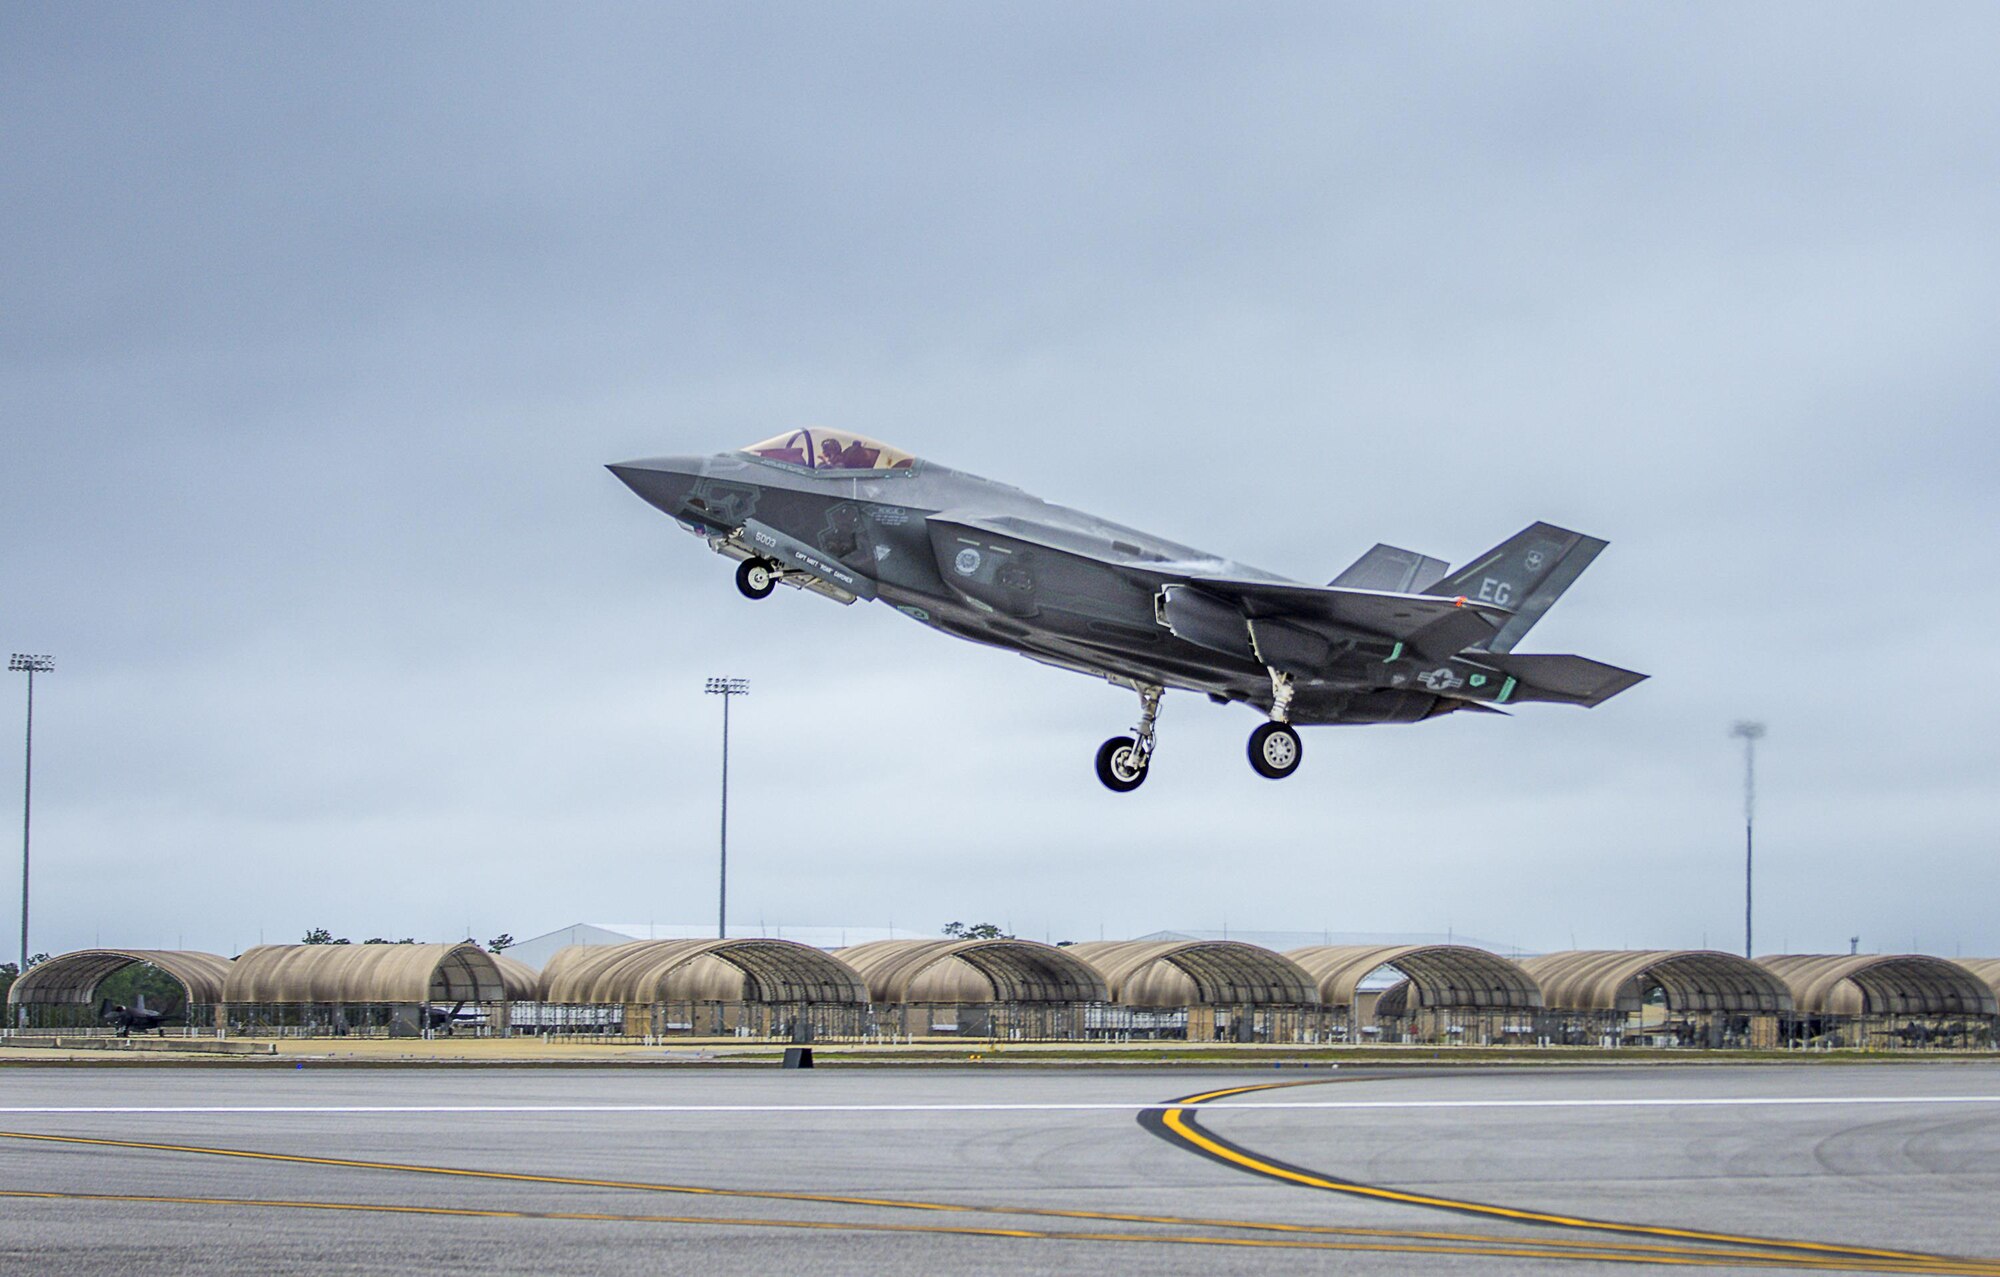 A 33rd Fighter Wing F-35A Lightning II takes off Feb. 27 to conduct sorties at Eglin Air Force Base, Fla. With conventional takeoff and landing capability, the F-35A is built for traditional Air Force bases. The F-35A is an agile, versatile, high-performance, 9g capable multirole fighter that combines stealth, sensor fusion, and unprecedented situational awareness. The 33rd Fighter Wing is a graduate flying and maintenance training wing for the F-35 Lightning II. (U.S. Air Force photo/Kristin Stewart)